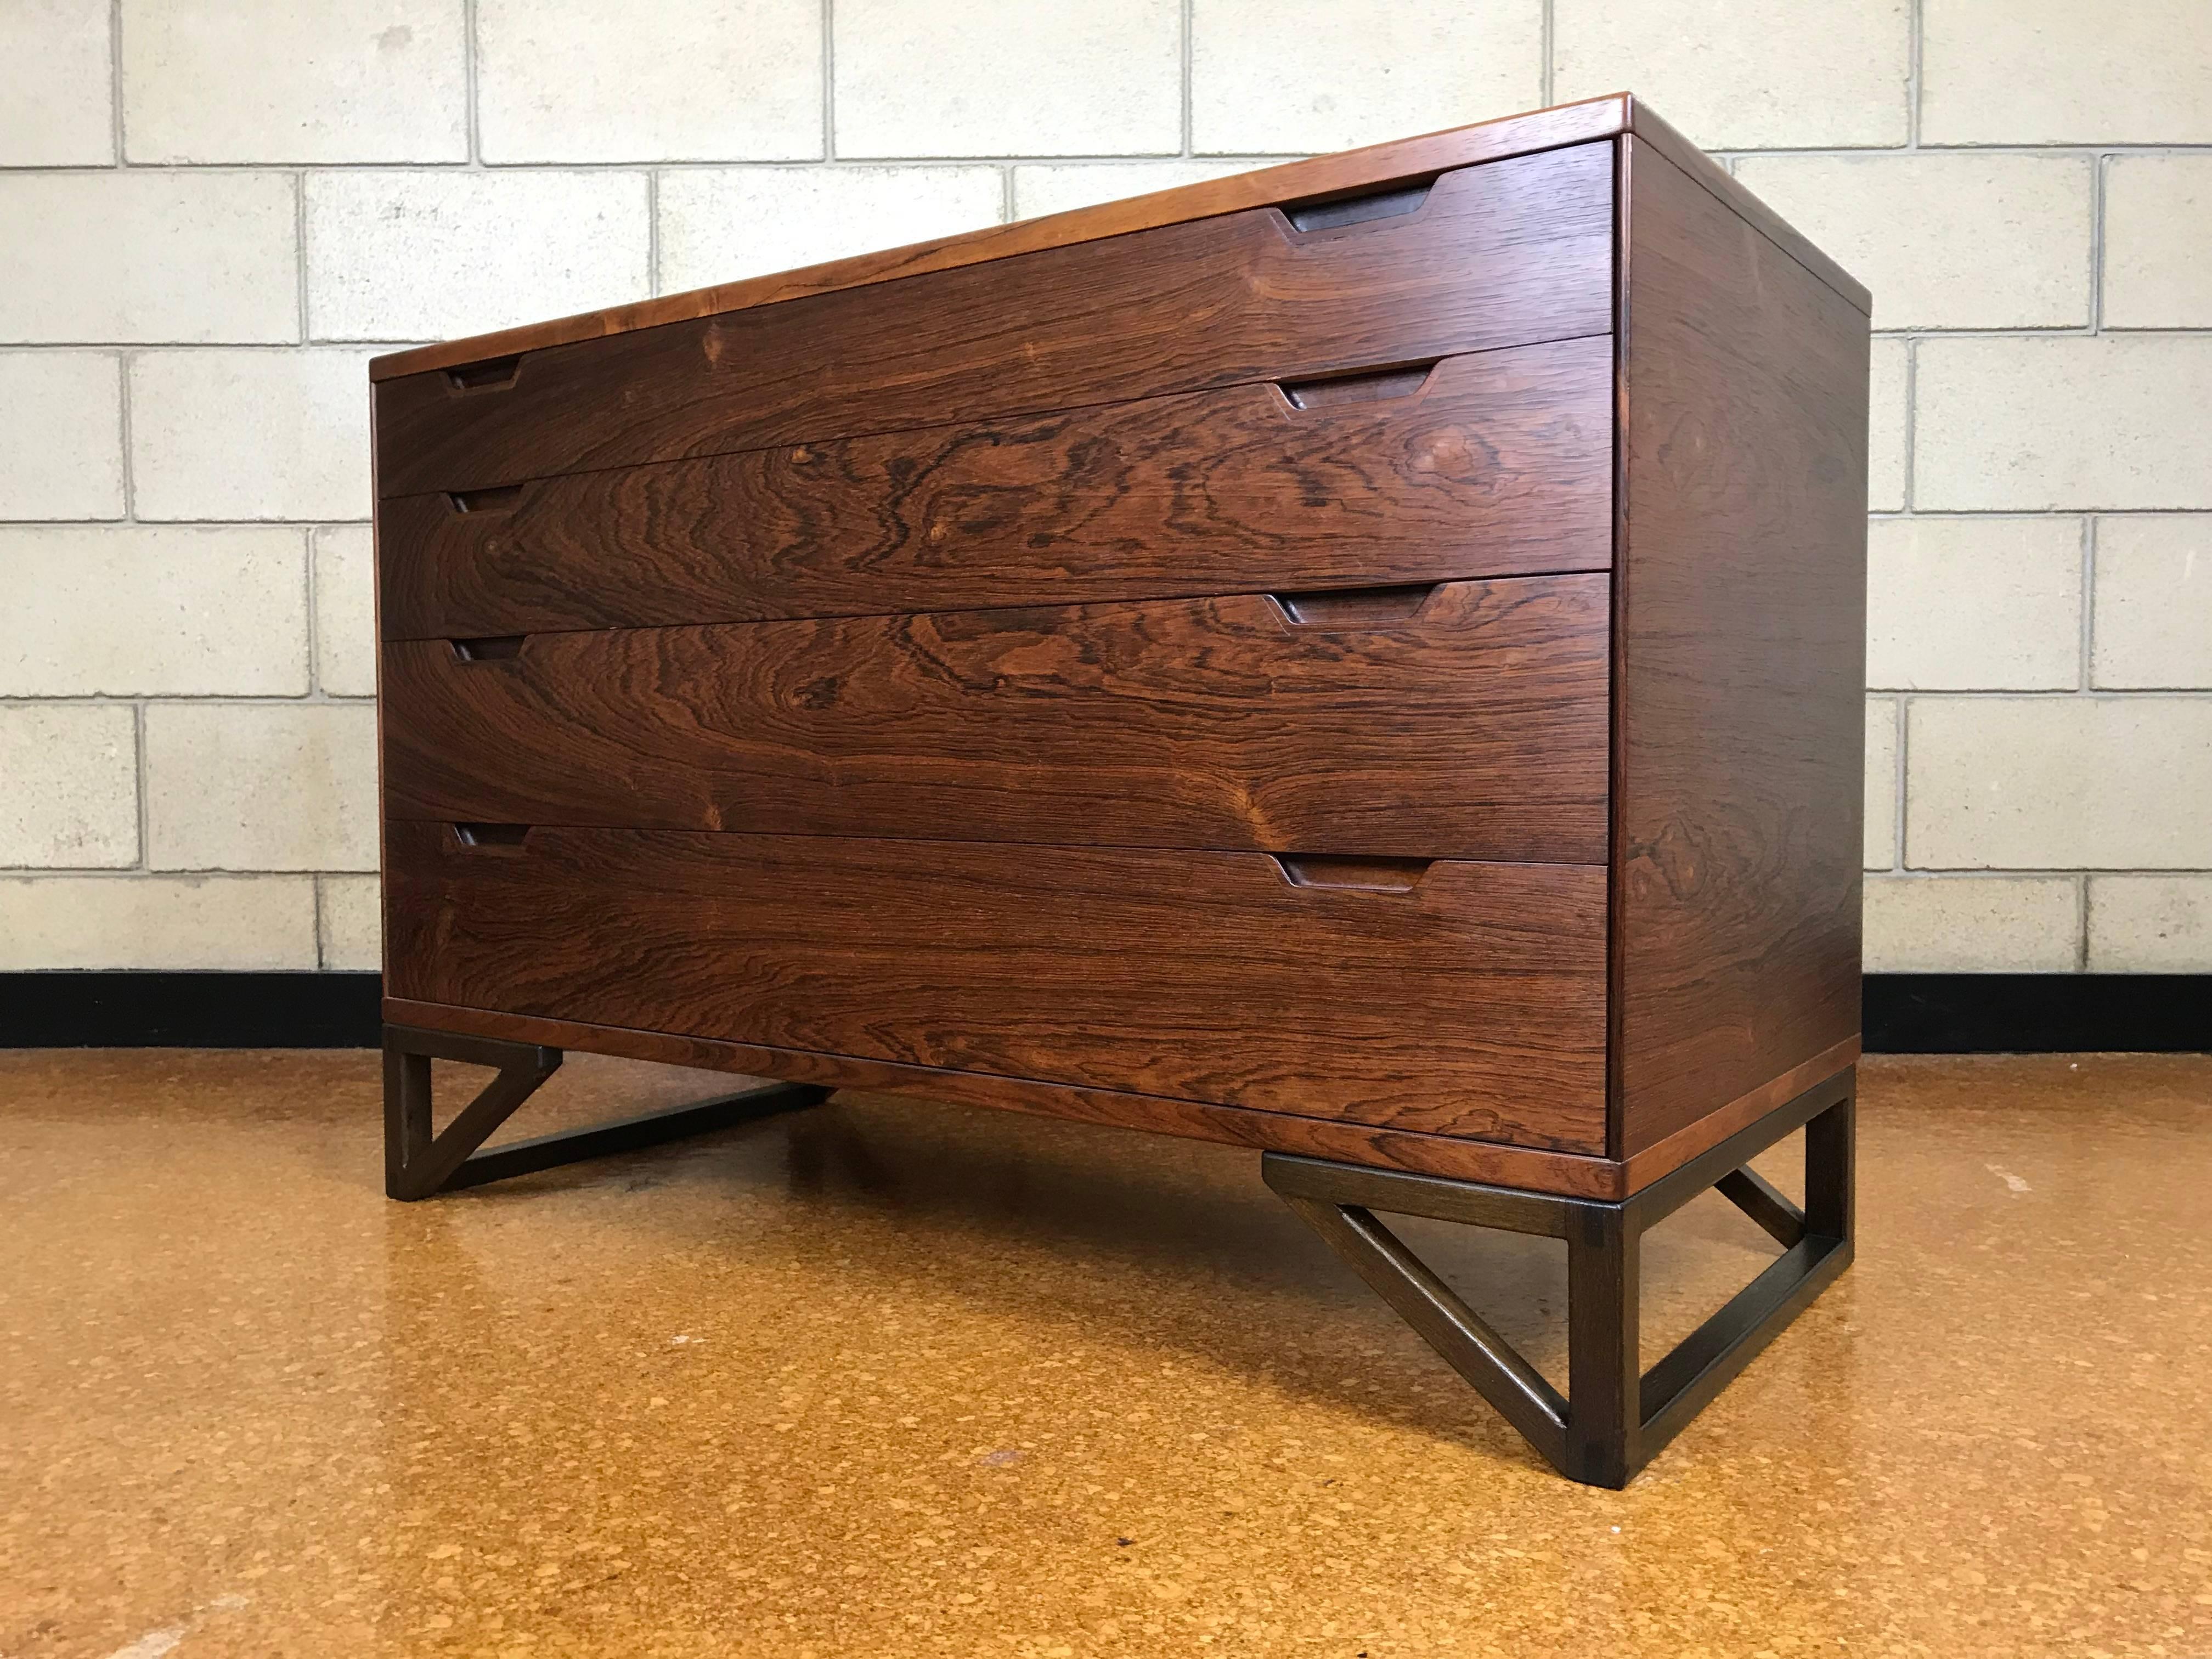 Beautiful and rare Danish Modern chest designed by Svend Langkilde. Made of grain-matched Rosewood - this piece is exceptional because it is in completely original excellent condition. Insides of the drawers are clean and have a faint cedar scent.